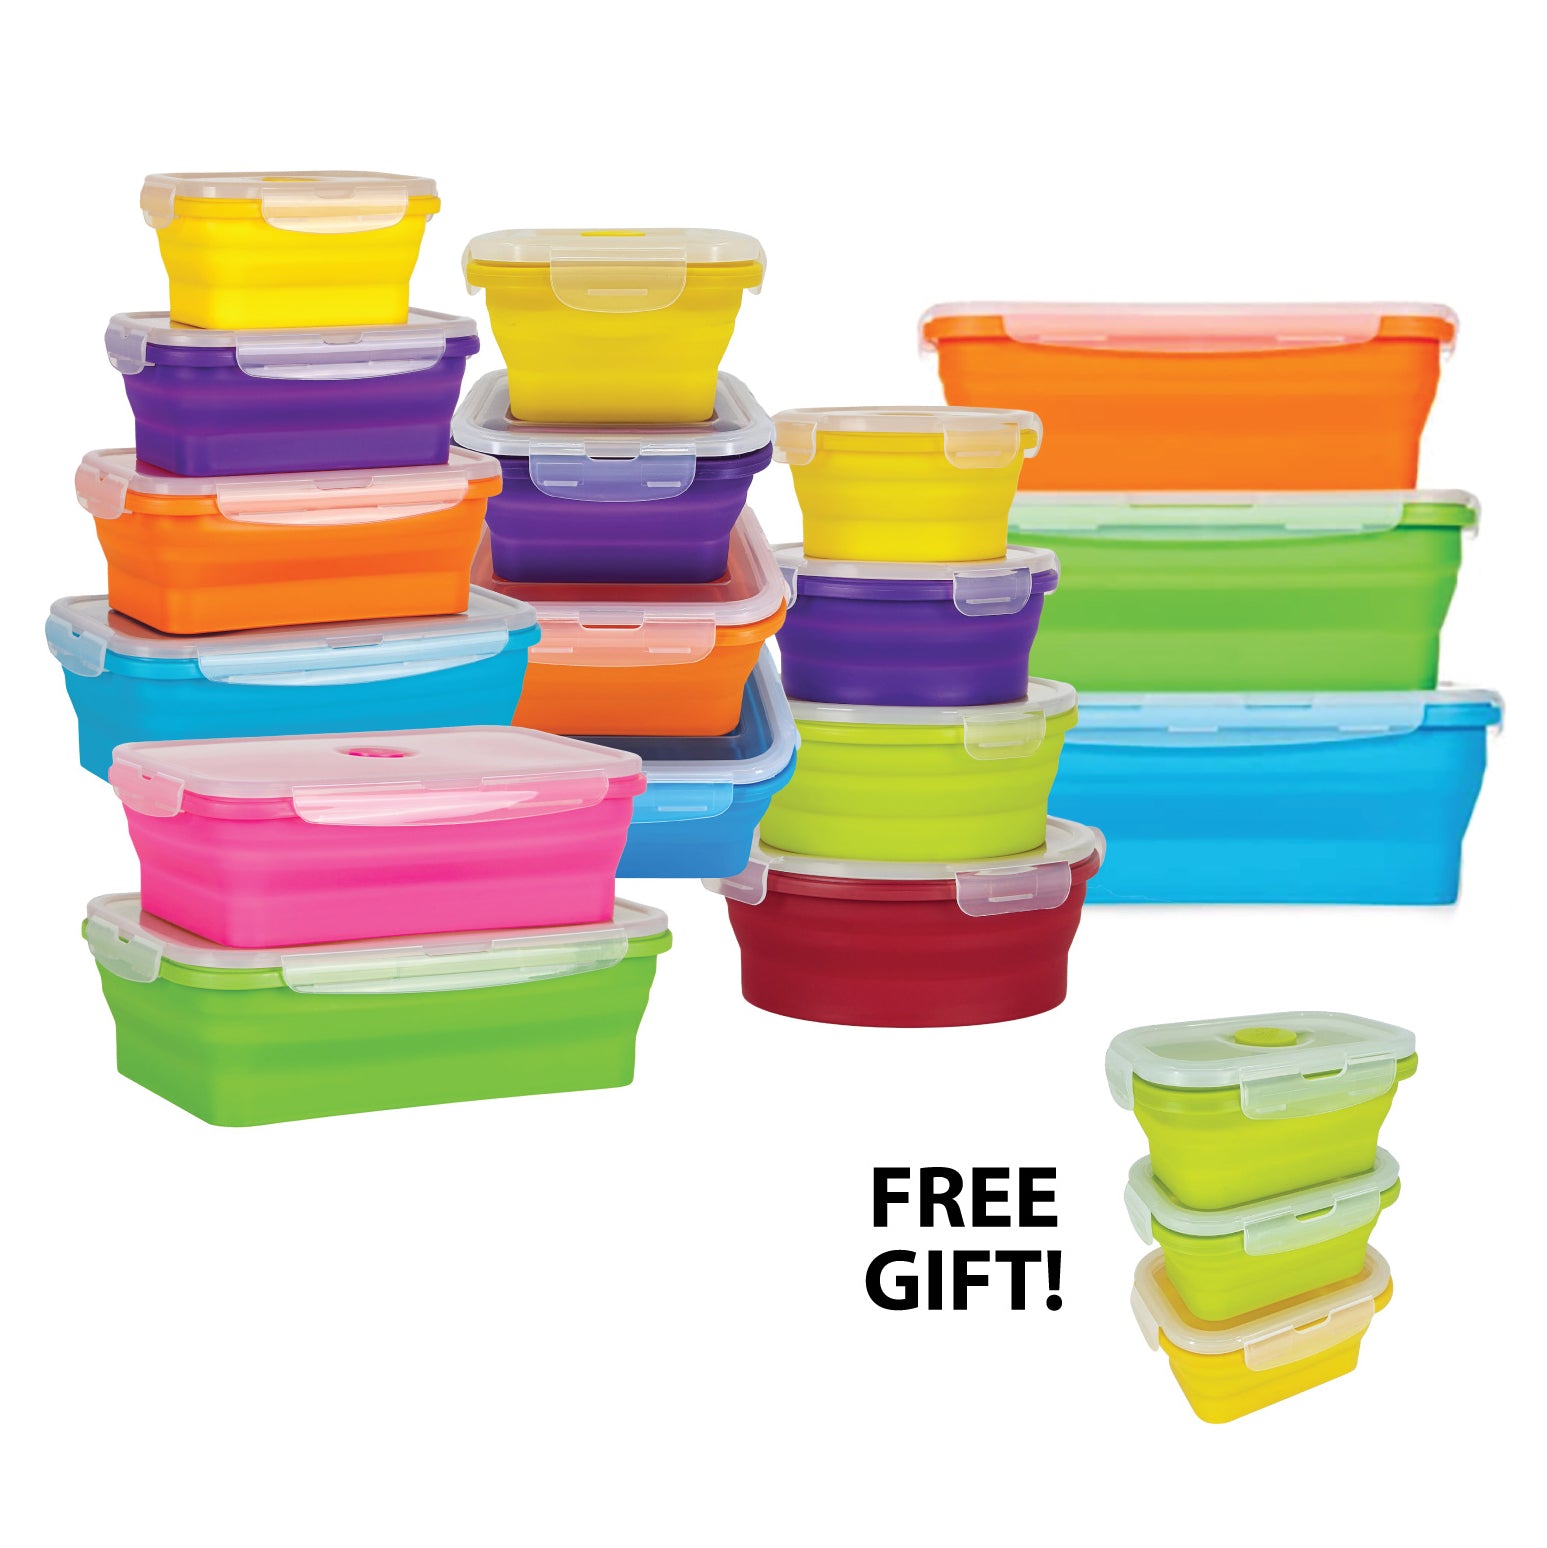 Set of 4 Collapsible Food Storage Containers with Lids Flat Stacks